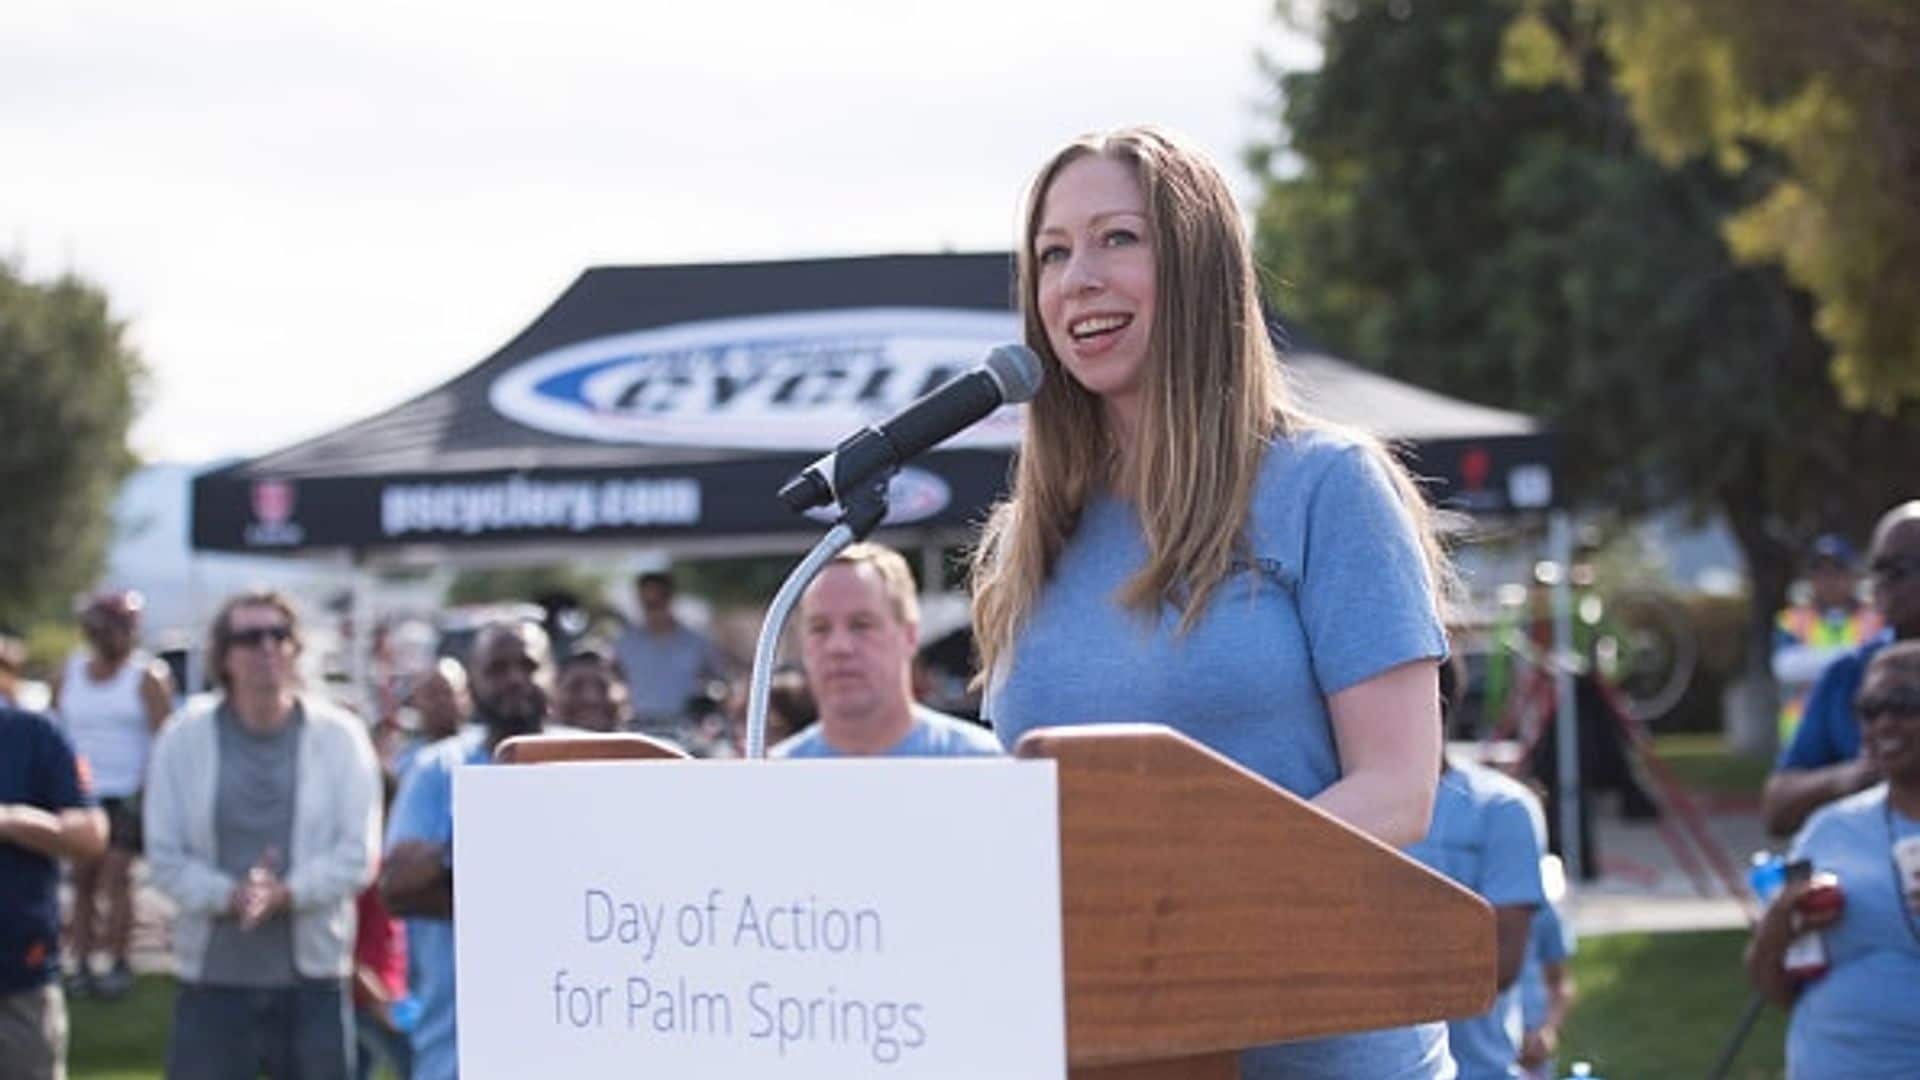 ​Chelsea Clinton shows off her slim post-baby body in skinny jeans